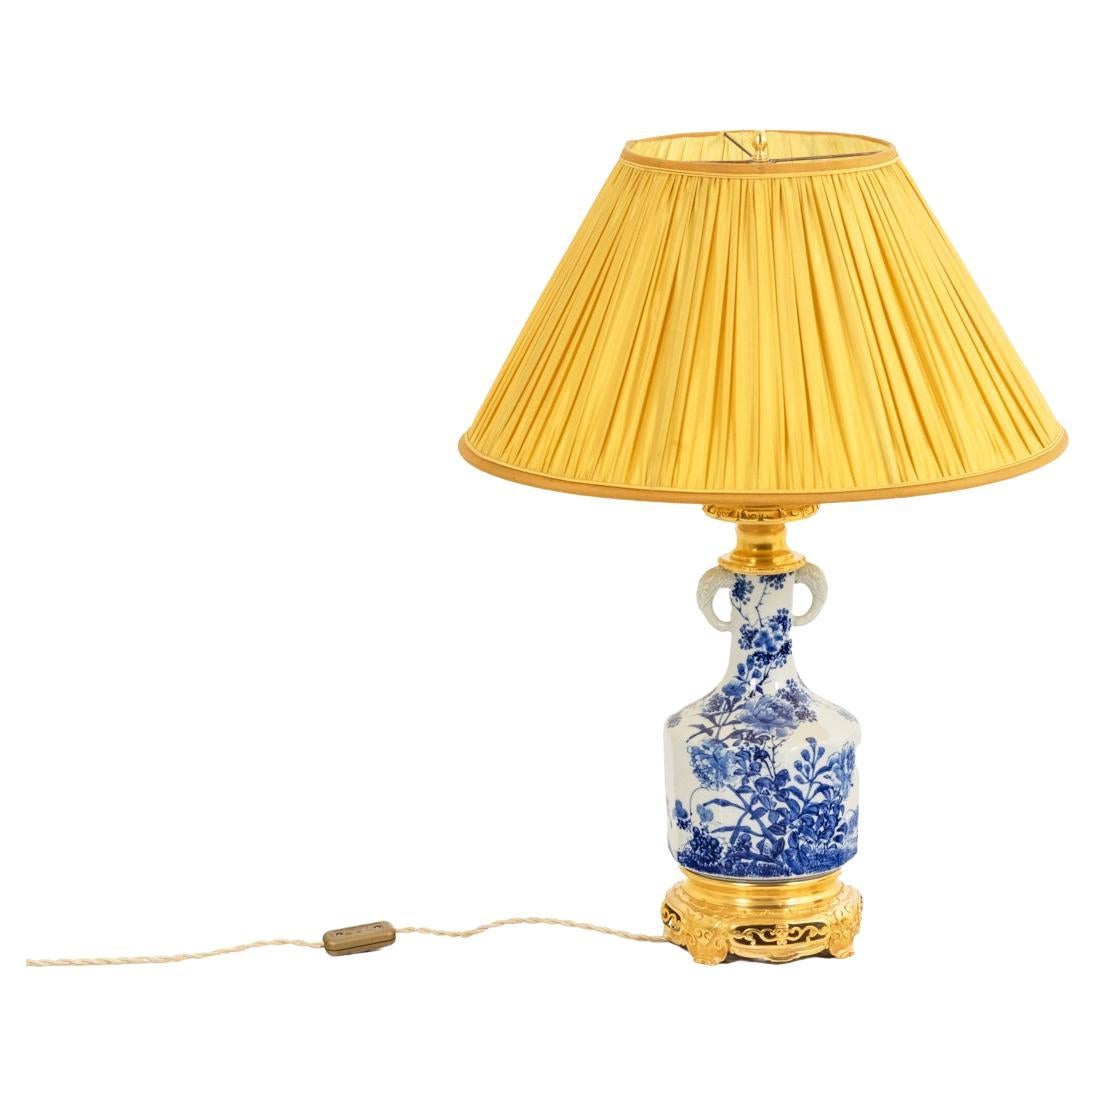 Lamp in Japanese Porcelain and Gilt Bronze, circa 1880